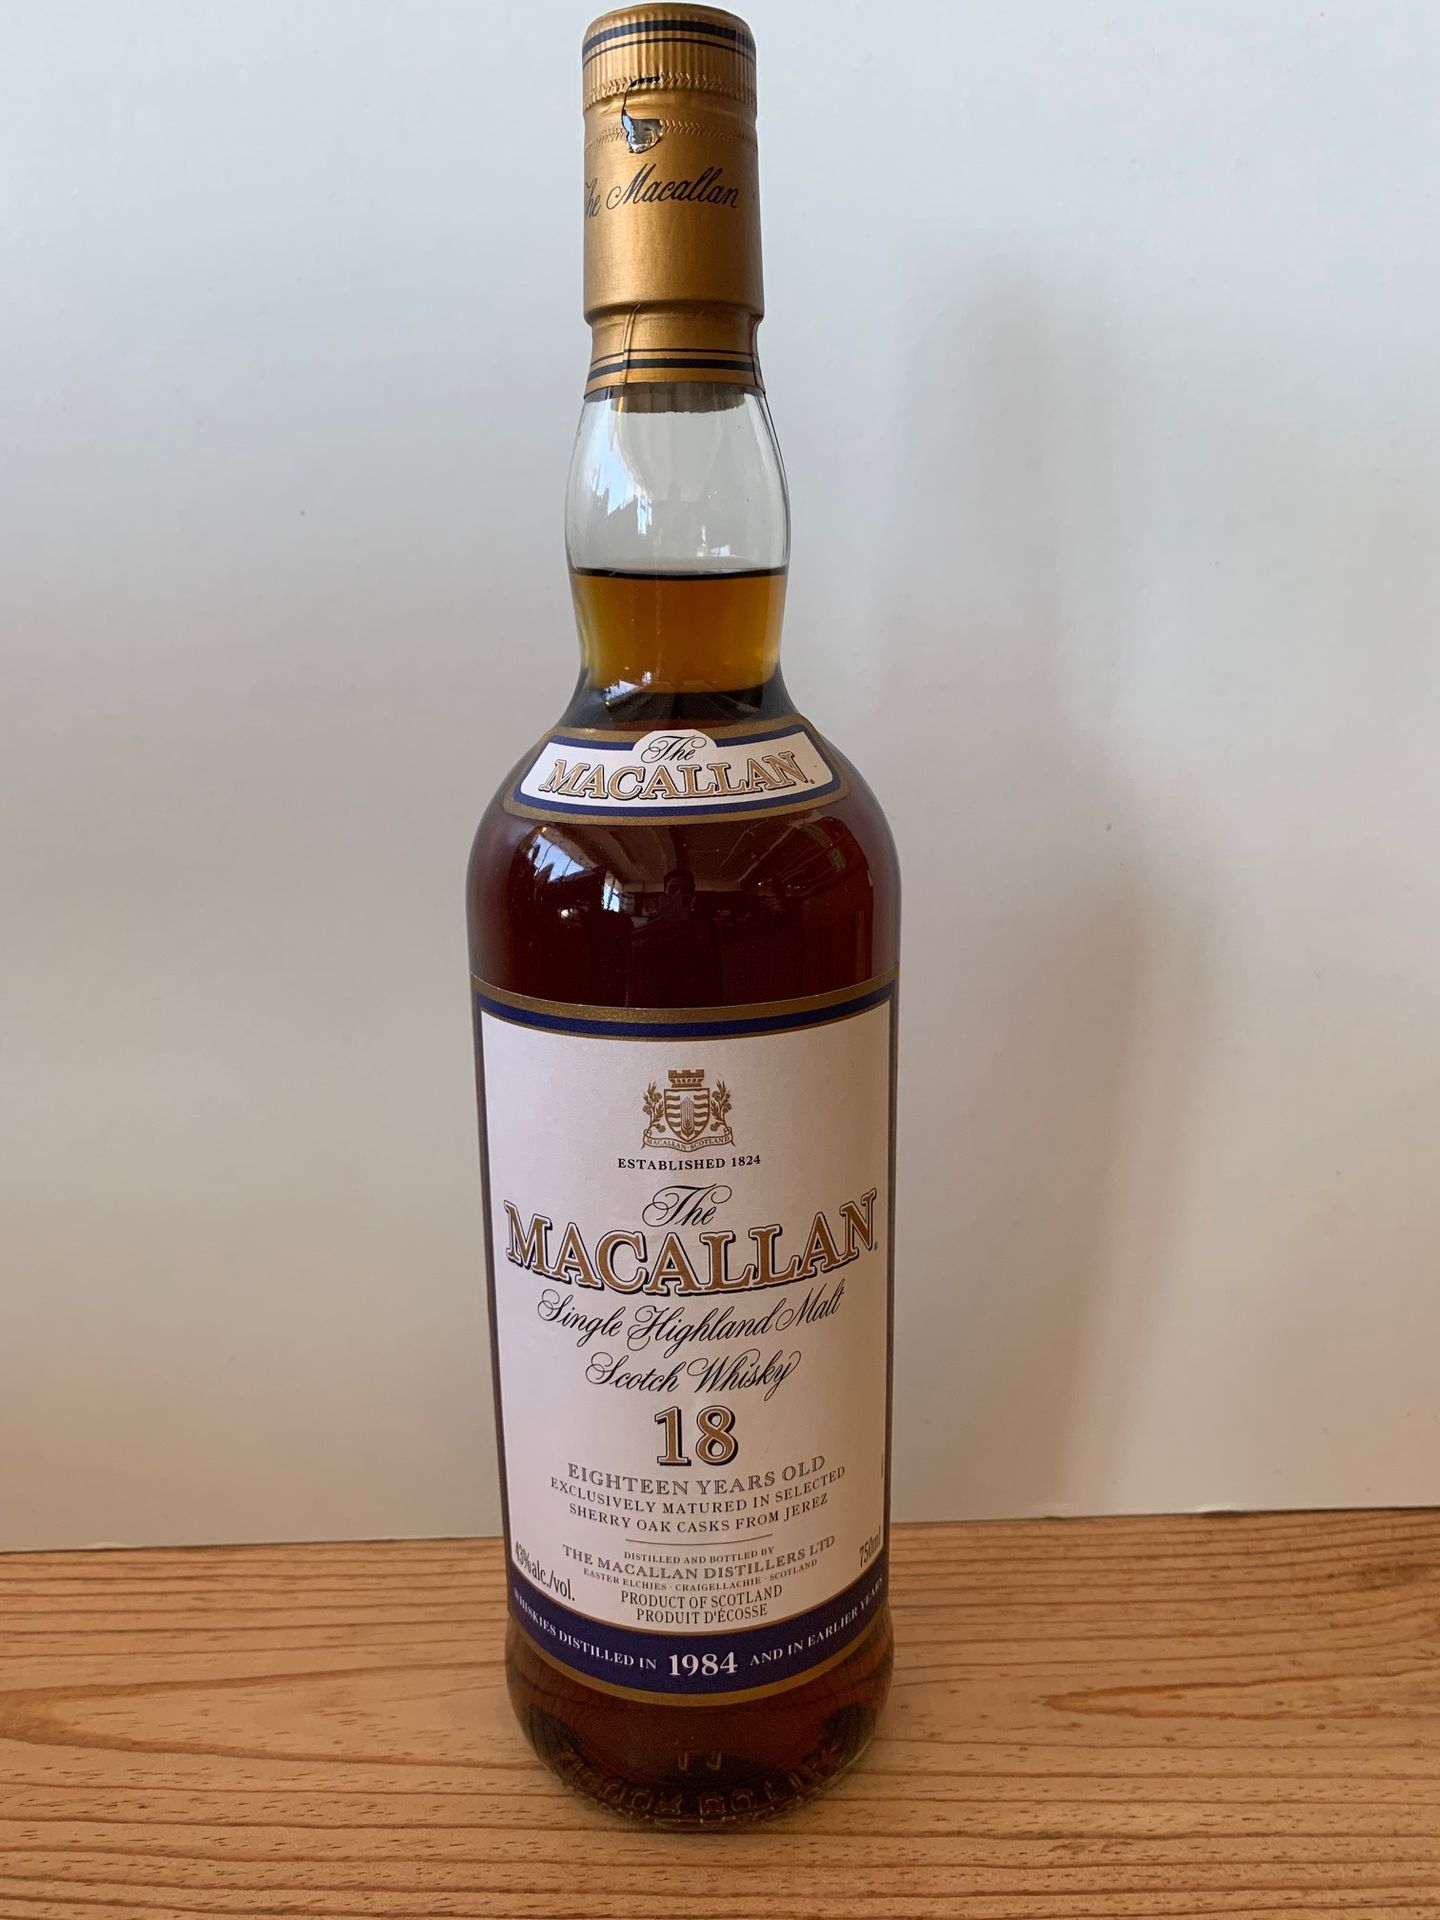 Null 1 B whisky "single malt" The Macallan, distilled in 1984, 18 years old, she&hellip;